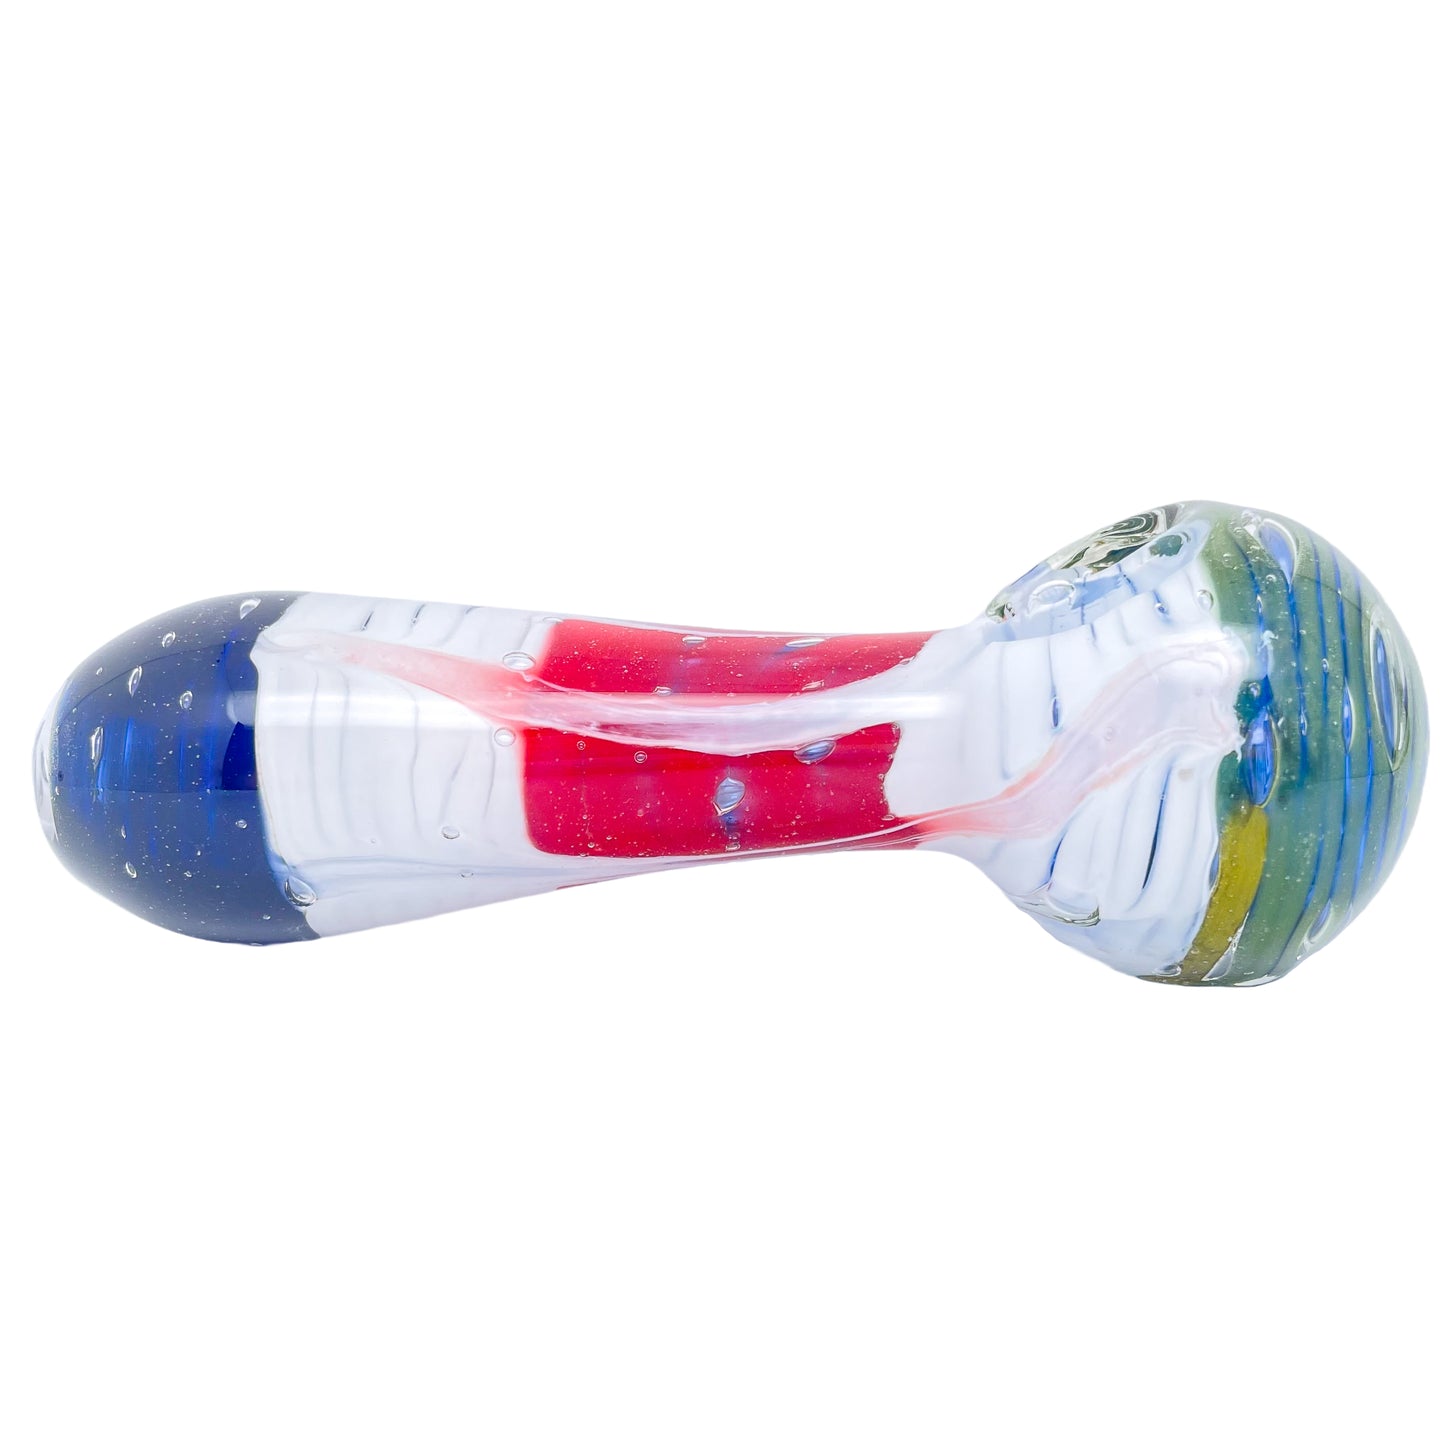 5.25" Red and White Spoon Pipe